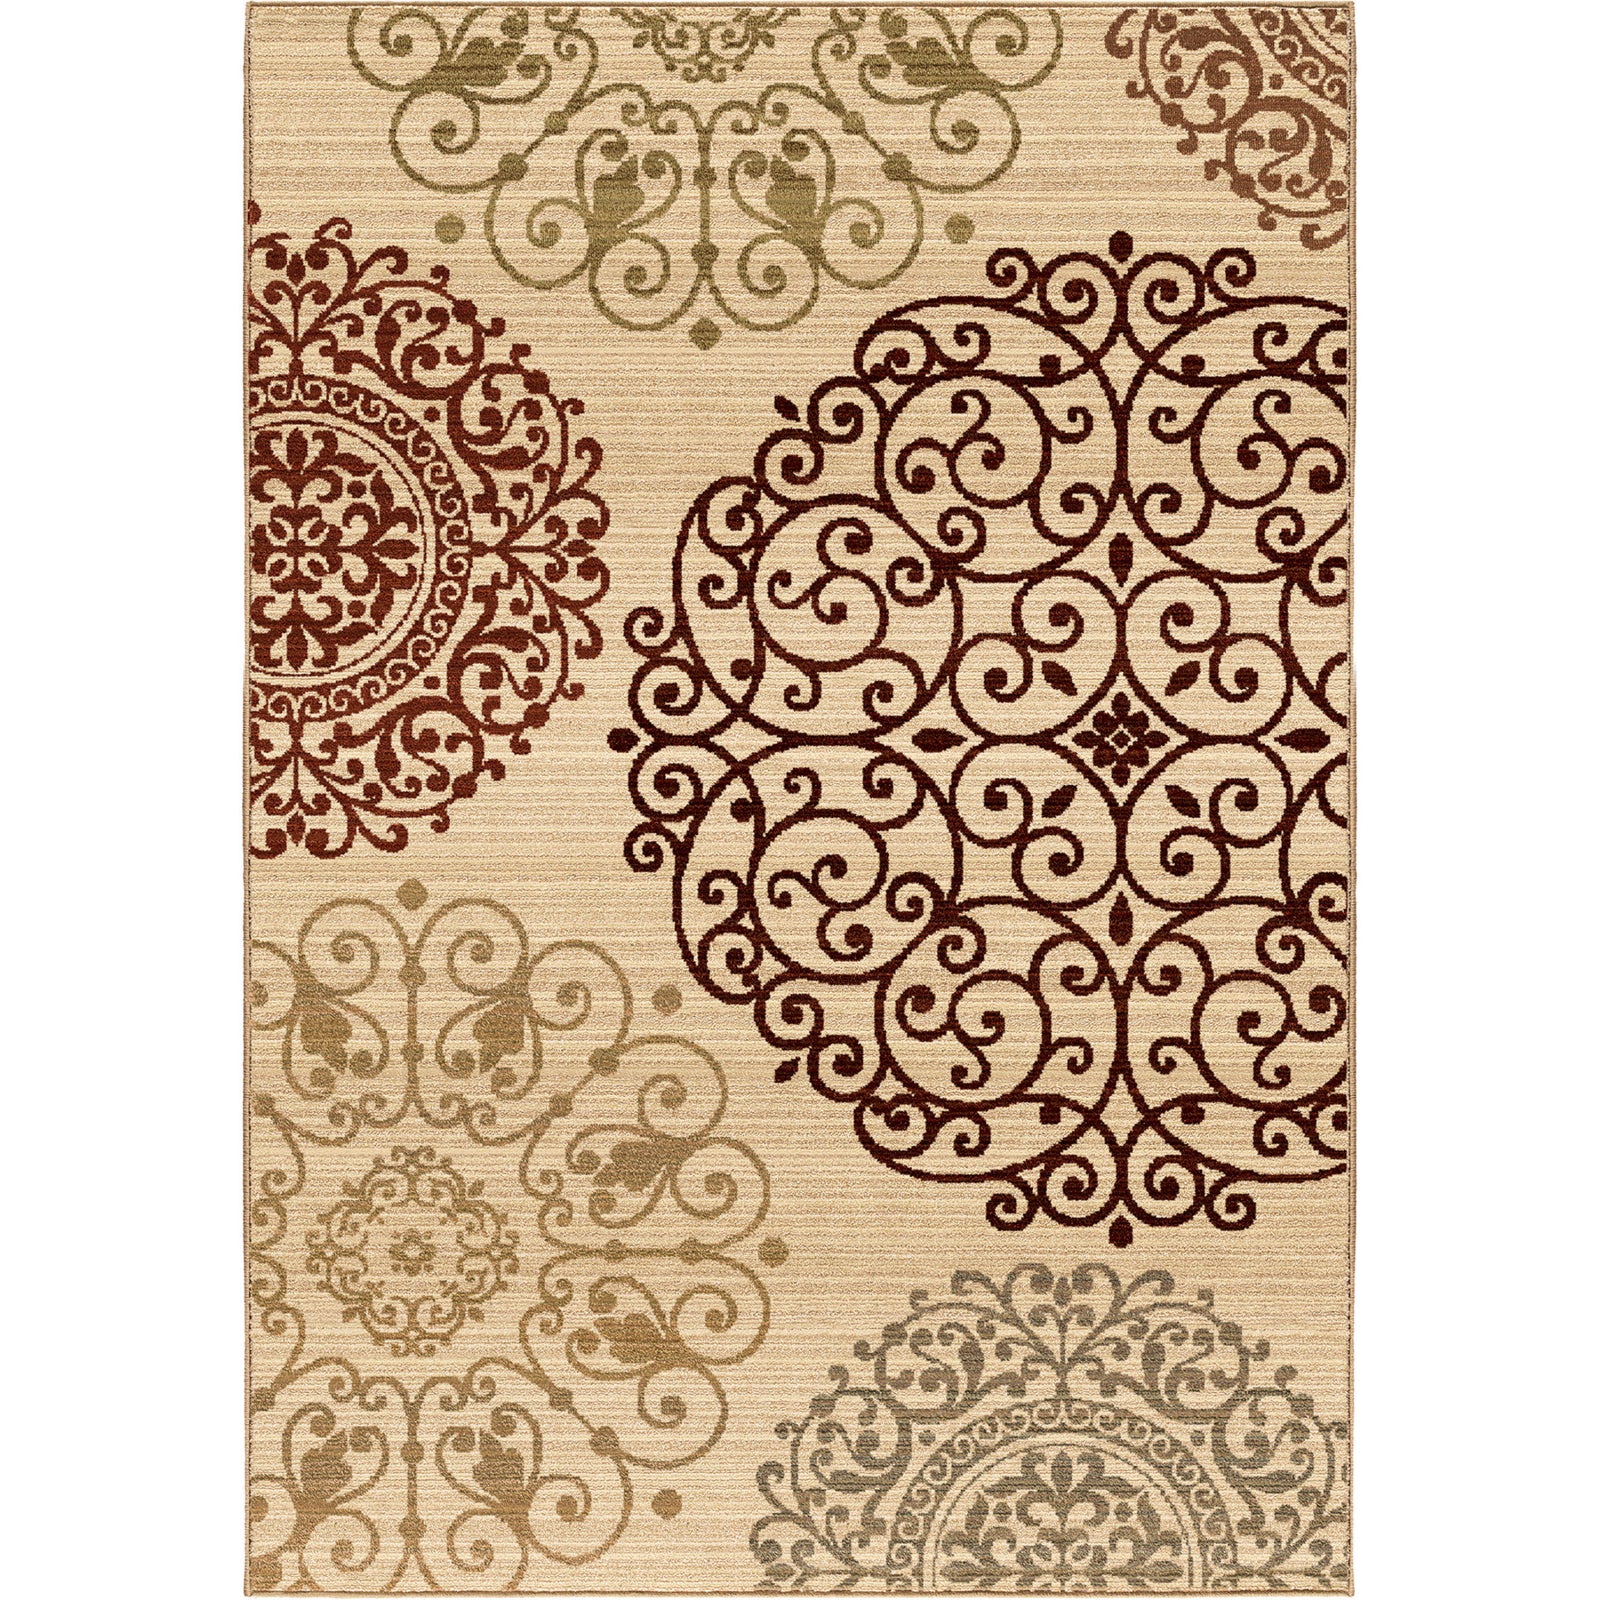 Orian Rugs Virtuous Scrolled Eclipse Ivory Area Rug main image